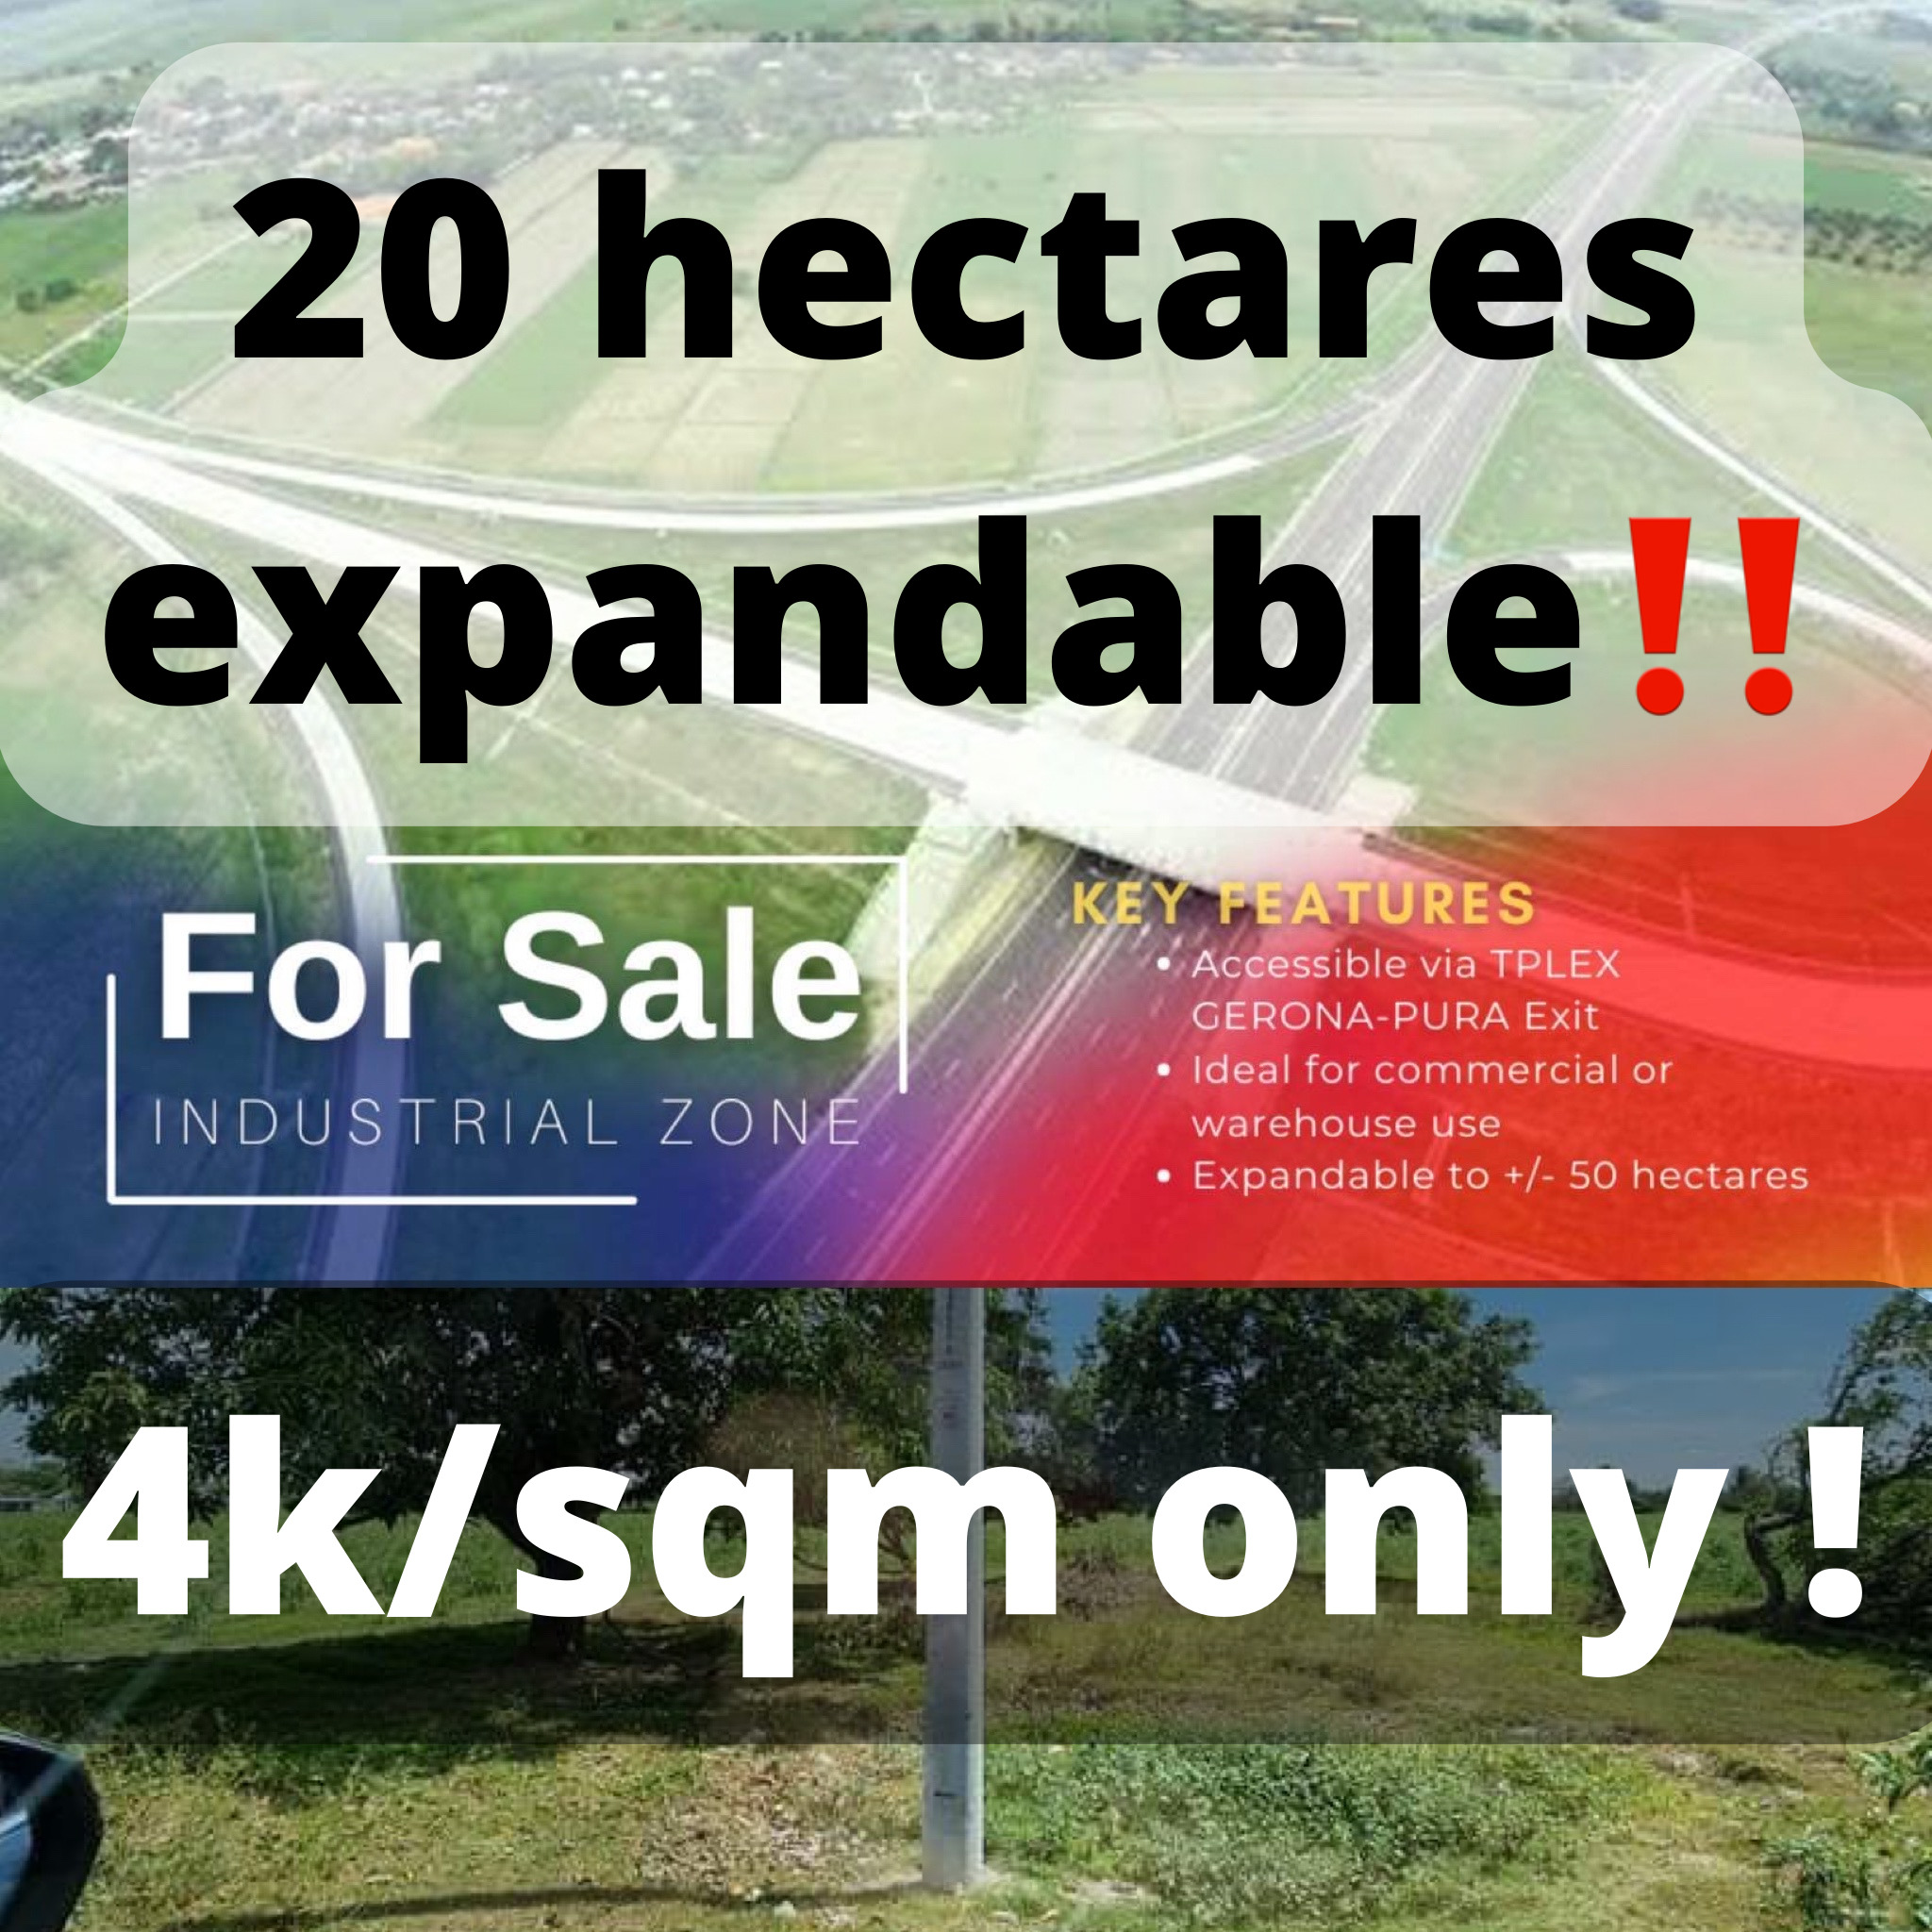 For sale 20 hectares expandable‼️